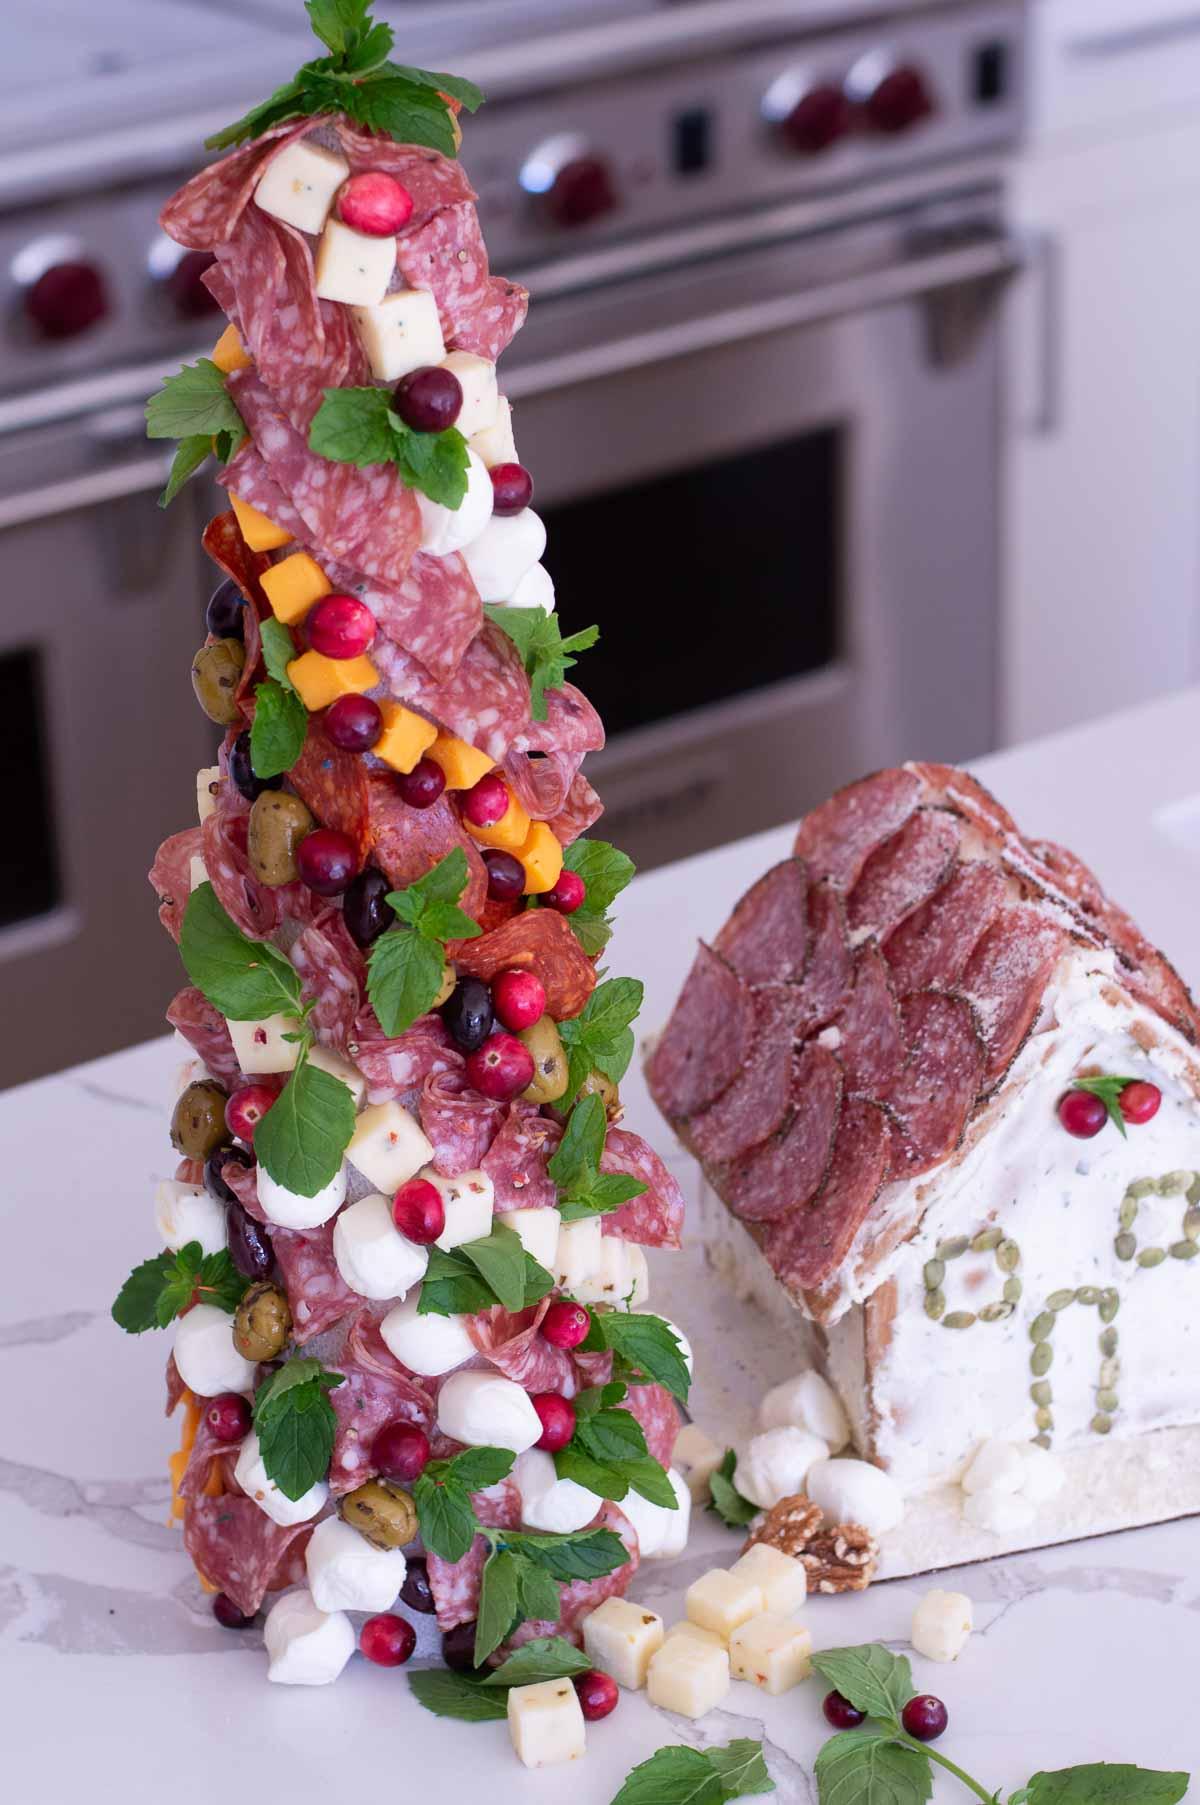 How to make a charcuterie tree and charcuterie chalet